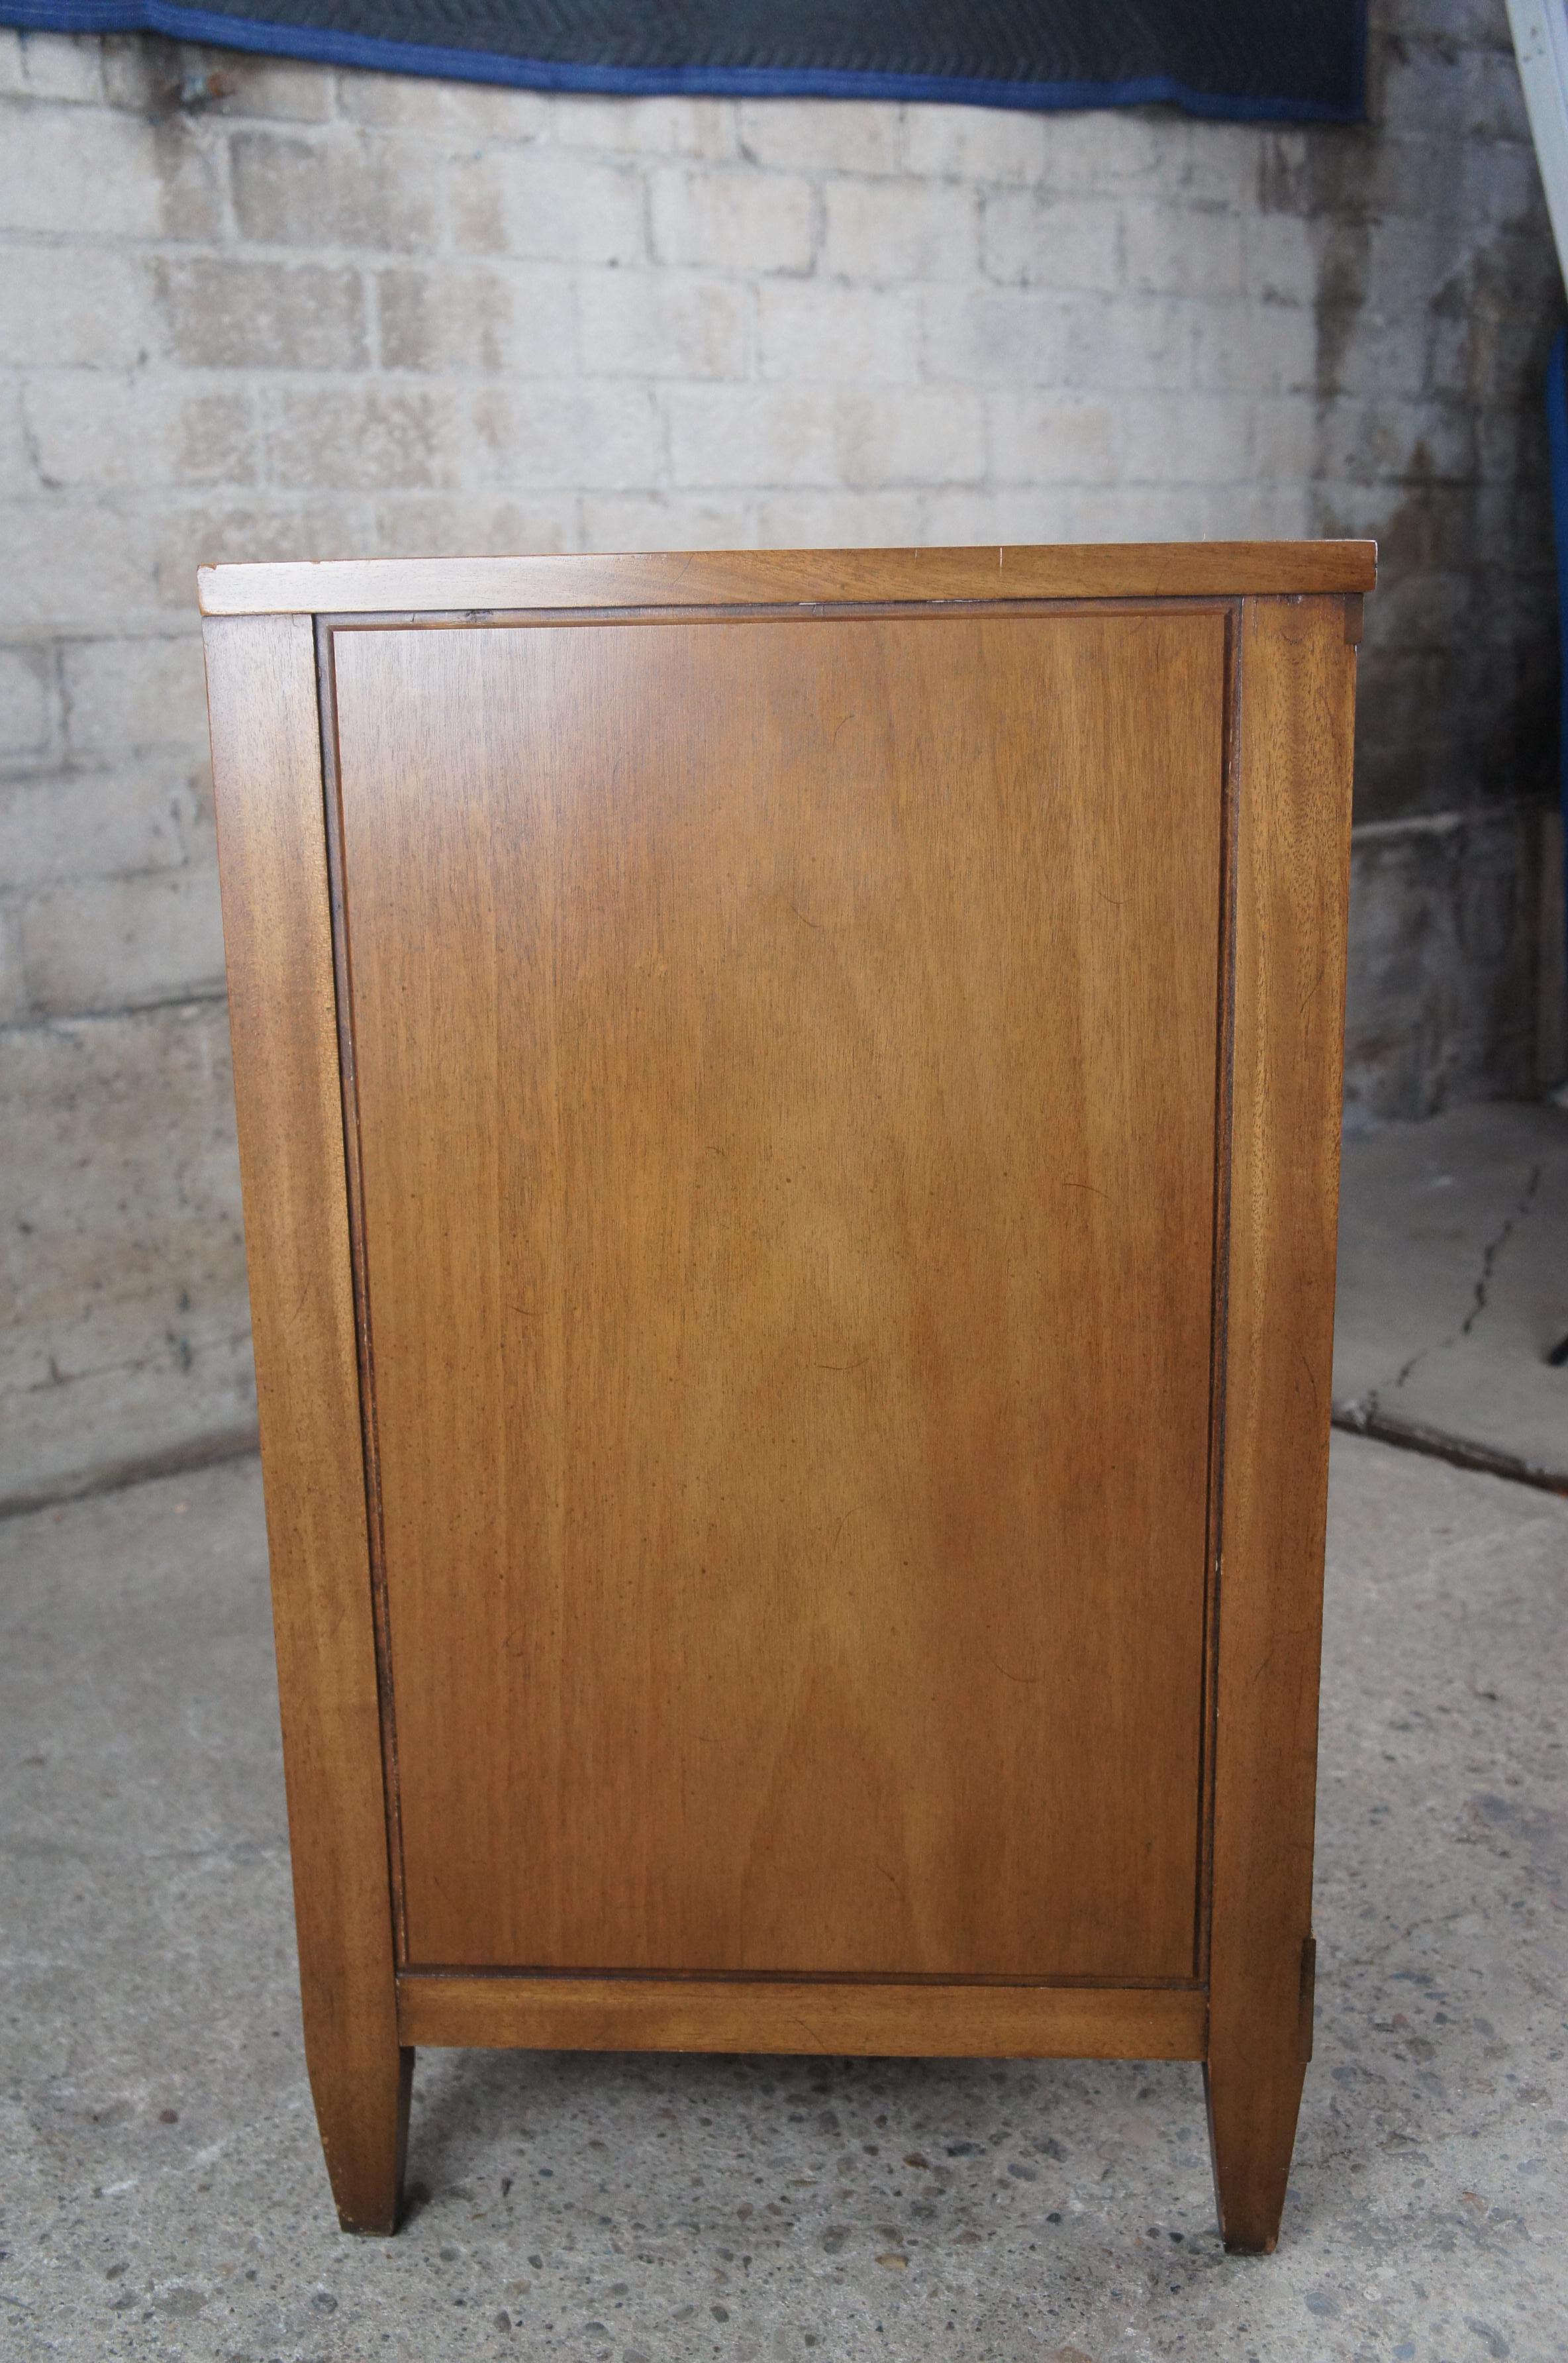 Drexel Triune Mid-Century Modern Mahogany Buffet Server Console Cabinet 585-407 For Sale 6